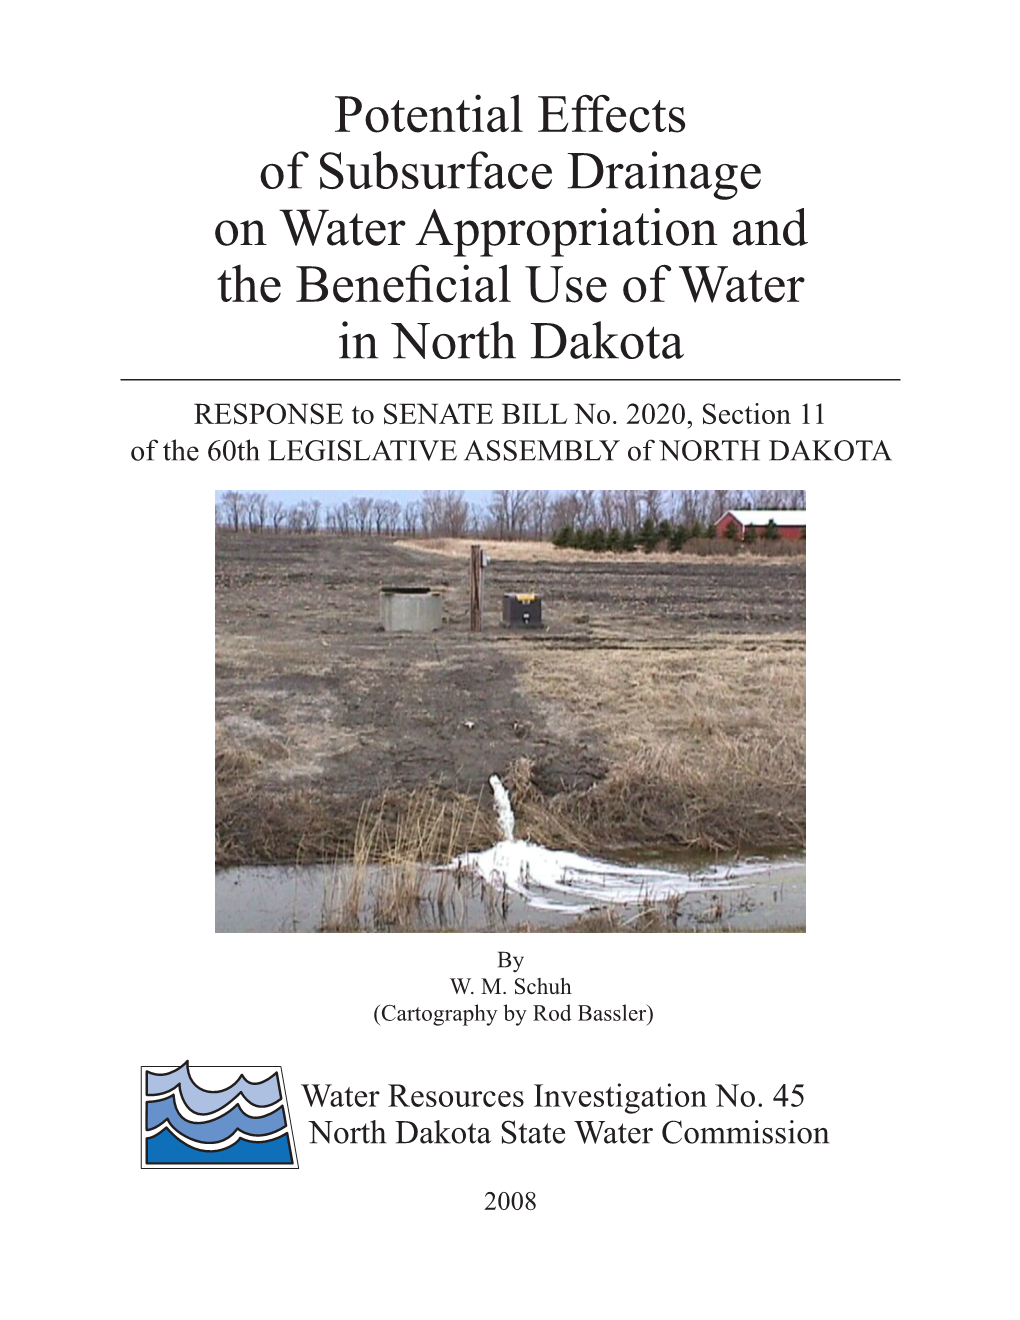 Potential Effects of Subsurface Drainage on Water Appropriation and the Beneficial Use of Water in North Dakota RESPONSE to SENATE BILL No